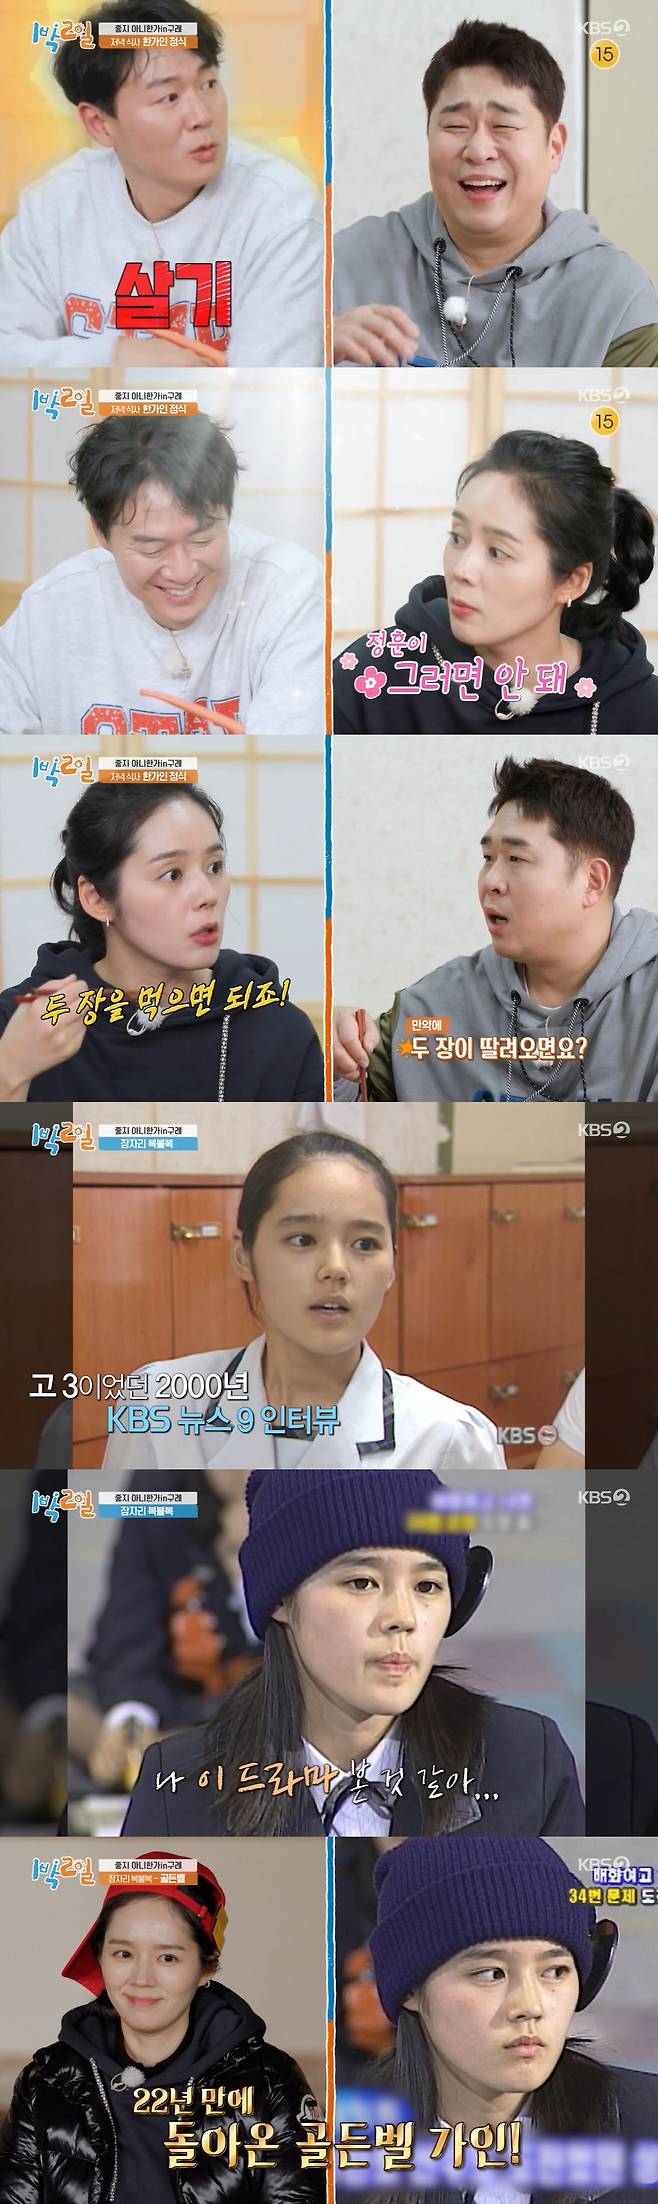 Actors Yeon Jung-hoon and Han Ga-in have released their love stories.The KBS2 entertainment program Season 4 for 1 Night 2 Days (hereinafter referred to as 1 night and 2 days) Not good in Gurye featured on the 17th was decorated with a trip with Yeon Jung-hoon and Han Ga-in.Han Ga-in team consisting of Han Ga-in, Ravi, Na In-woo, Mun Se-yun and Yeon Jung-hoon team consisting of Yeon Jung-hoon, DinDin and Kim Jong-min were confronted with Bokbulbok Show Game in the evening.Han Ga-in has baffled members with a strong momentum.Ravi, Na In-woo and Mun Se-yun also played, with the Game result ending with a 8:4 win for the Han Ga-in team.Han Ga-in, who was released after the release, was filled with crab dishes such as soy sauce, seasoned crab crab, and Taean crabland.What do we do? I love it, he said, laughing at the reaction. Na In-woo also laughed, saying, I am so happy. It is really delicious.A short time later, Yeon Jung-hoon team members had the opportunity to eat one of the Han Ga-in formal menus.When Mun Se-yun threw eat white kimchi, Yeon Jung-hoon was hot, and Han Ga-in said, Jung Hoon should not do it. Bad words, bad faces!I laughed.When the story of the seed leaf controversy came out during the story, Han Ga-in said, Why do you hold the sesame leaf? Is she not chopsticks?If you have two sheets, you can eat two sheets or eat a lot of rice. It is not so much to watch other women take off sesame leaves.Before the start of the Bokbulbok Show Game, the production team released a news interview video of Han Ga-in in the third grade of high school in 2000, saying, Han Ga-in has a lot of videos that have been talked about before his debut.Han Ga-in explained, The news team came to school, and at that time, the children recommended me to interview me because they were beautiful.When KBS2 Top Model Golden Bell appeared, the members admired it as a scene of drama.Han Ga-in was interested in the score of Han Ga-in, who said, It was 380 out of 400, and it was a few wrongs.The Bokbulbok Show Game was conducted under the concept of Top Model Golden Bell, followed by problems such as lions words and proverbs.Han Ga-in was named first, and Kim Jong-min was named last.The next day, Han Ga-in was impressed by the unfavorable beauty of the flowers after the weather. The members said, Did you sleep? What is your brothers face?, I didnt pour one, and I laughed.On the way to the next green tea field, Yeon Jung-hoon and Han Ga-in confessed their love Kahaani and made their ears prick.Yeon Jung-hoon recalled, My wife wrote a letter and made it into a cake shape: Han Ga-in written and made it with a cake.My husband likes Toyota, so I made a Toyota cake and gave it to him with a name. My husband is really afraid of sleeping.I have been playing a lot of games and I have put it in the box. Yeon Jung-hoon said, I remember being bitten when I was a child.I almost broke up, he said.Han Ga-in also mentioned Yeon Jung-hoon and her dreaming old life: I want to travel to a quiet countryside with my husband when Im done with my children sending school.I like the song Ungodly Confession , I like the brilliant bouquet that I gave you one day.The light and the fragrance will soon be withered and the flower will be more beautiful than the flower, but then the flower and our other affection will breathe. This is the lyrics.I like the song because I think there will be our own Kahaani even if I become an old grandmother and grandfather. Yeon Jung-hoon and Han Ga-in finished their schedule with a badon-doson breakfast in a quiet green tea field.